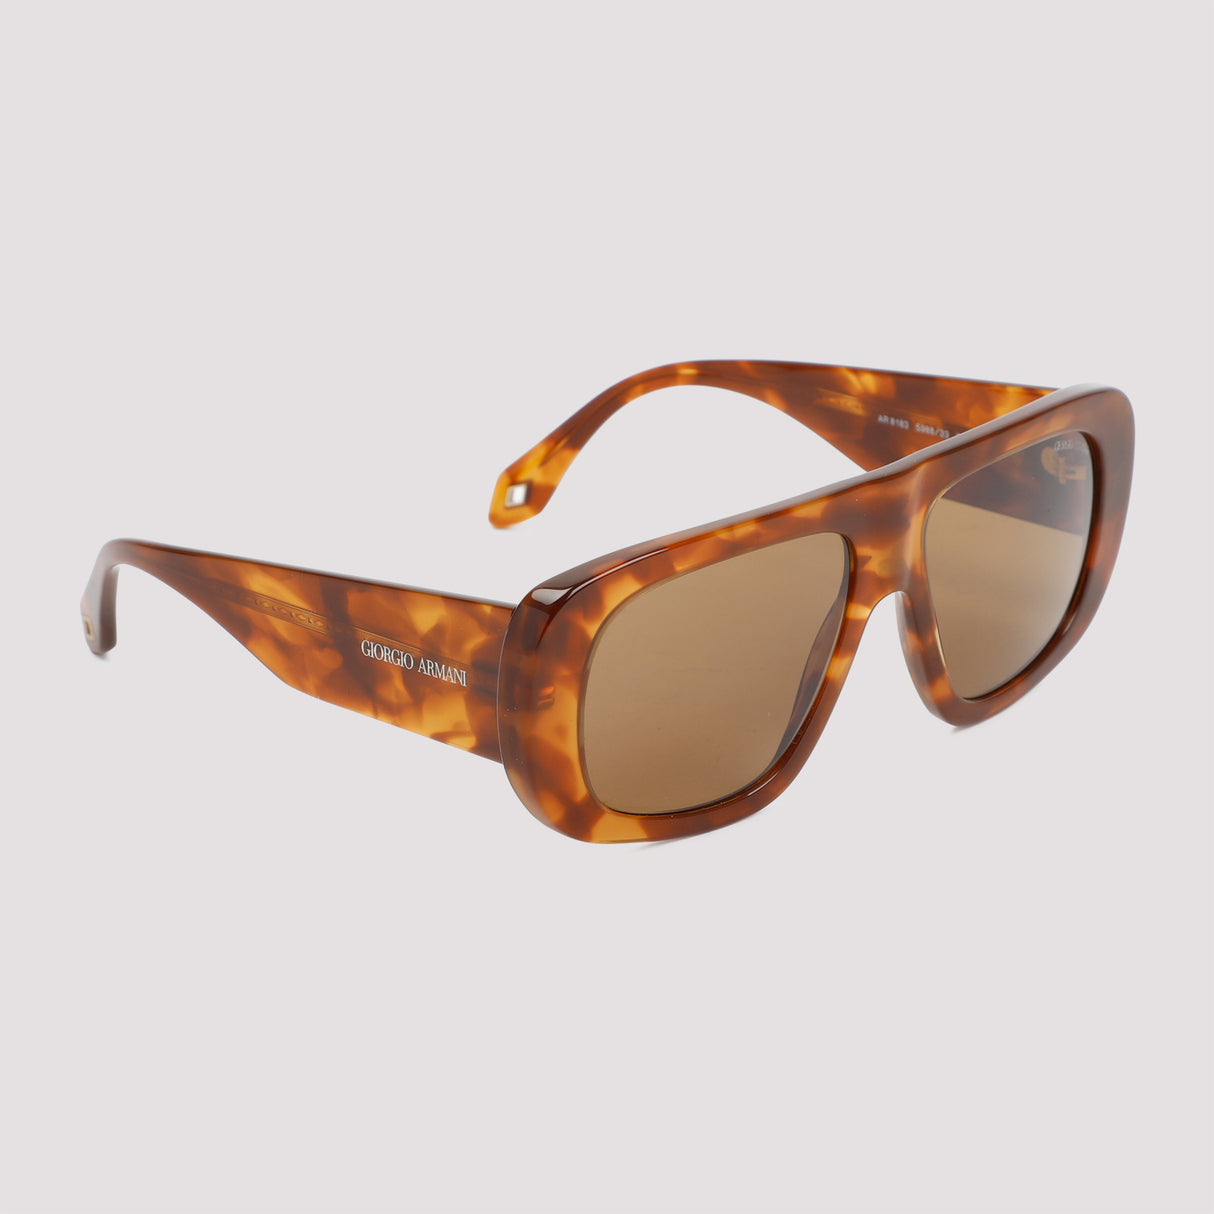 GIORGIO ARMANI Irregular-Shaped Sunglasses for Men and Women in Brown for FW23